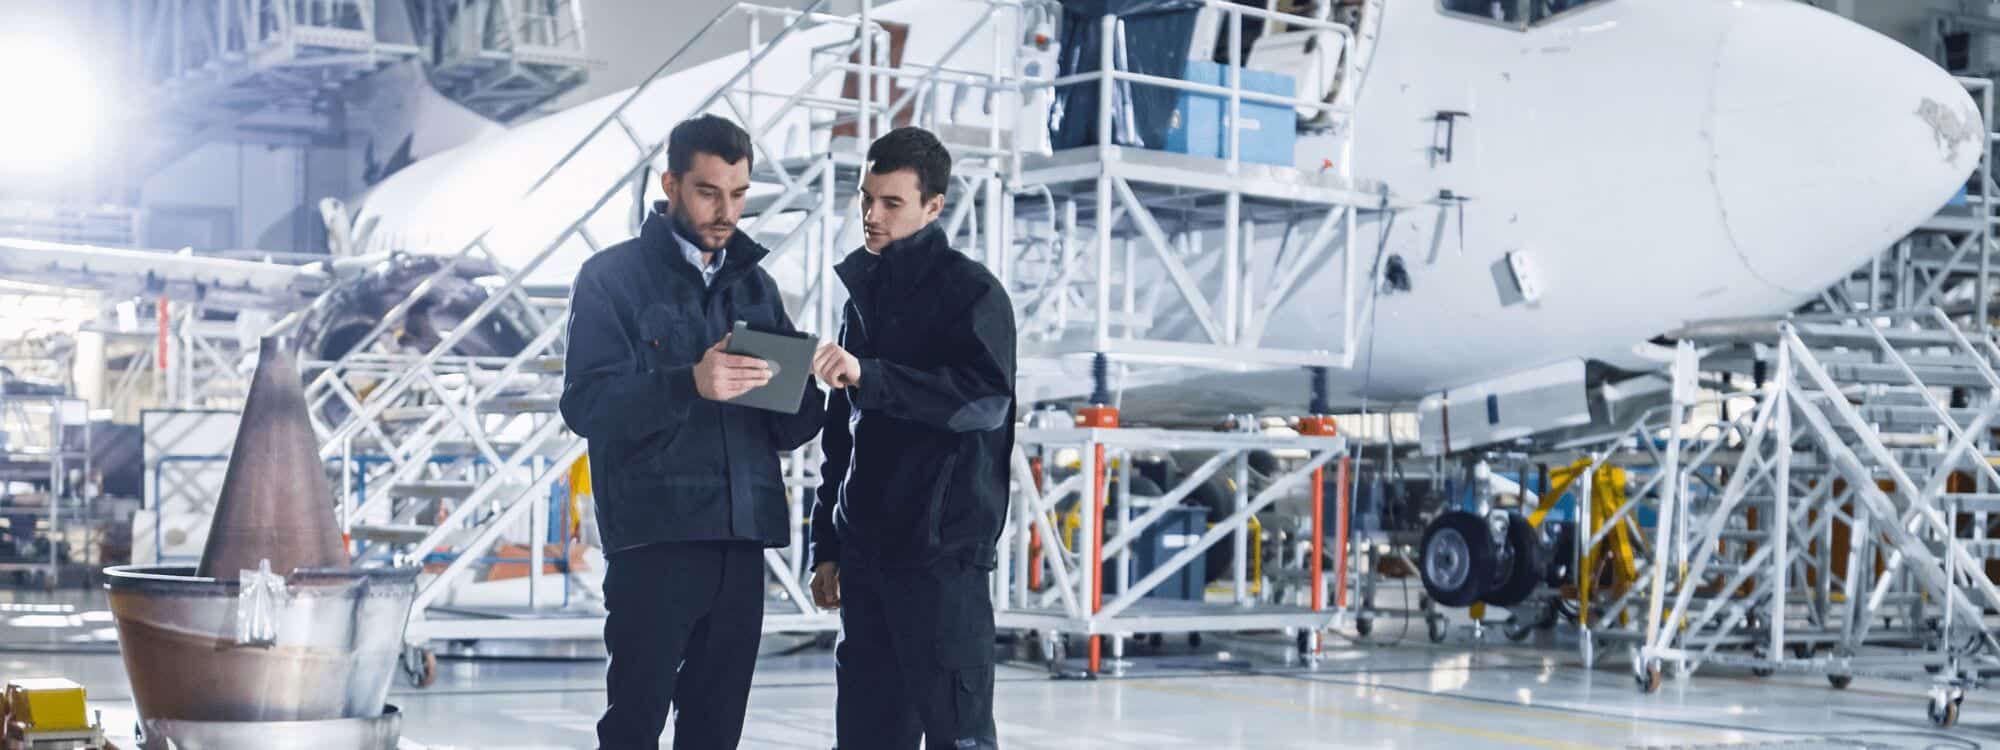 Two maintenance workers in an aerodrome hangar discuss how to implement recently learnt safety improvements from a Southpac Aviation Maintenance Human Factors Course.